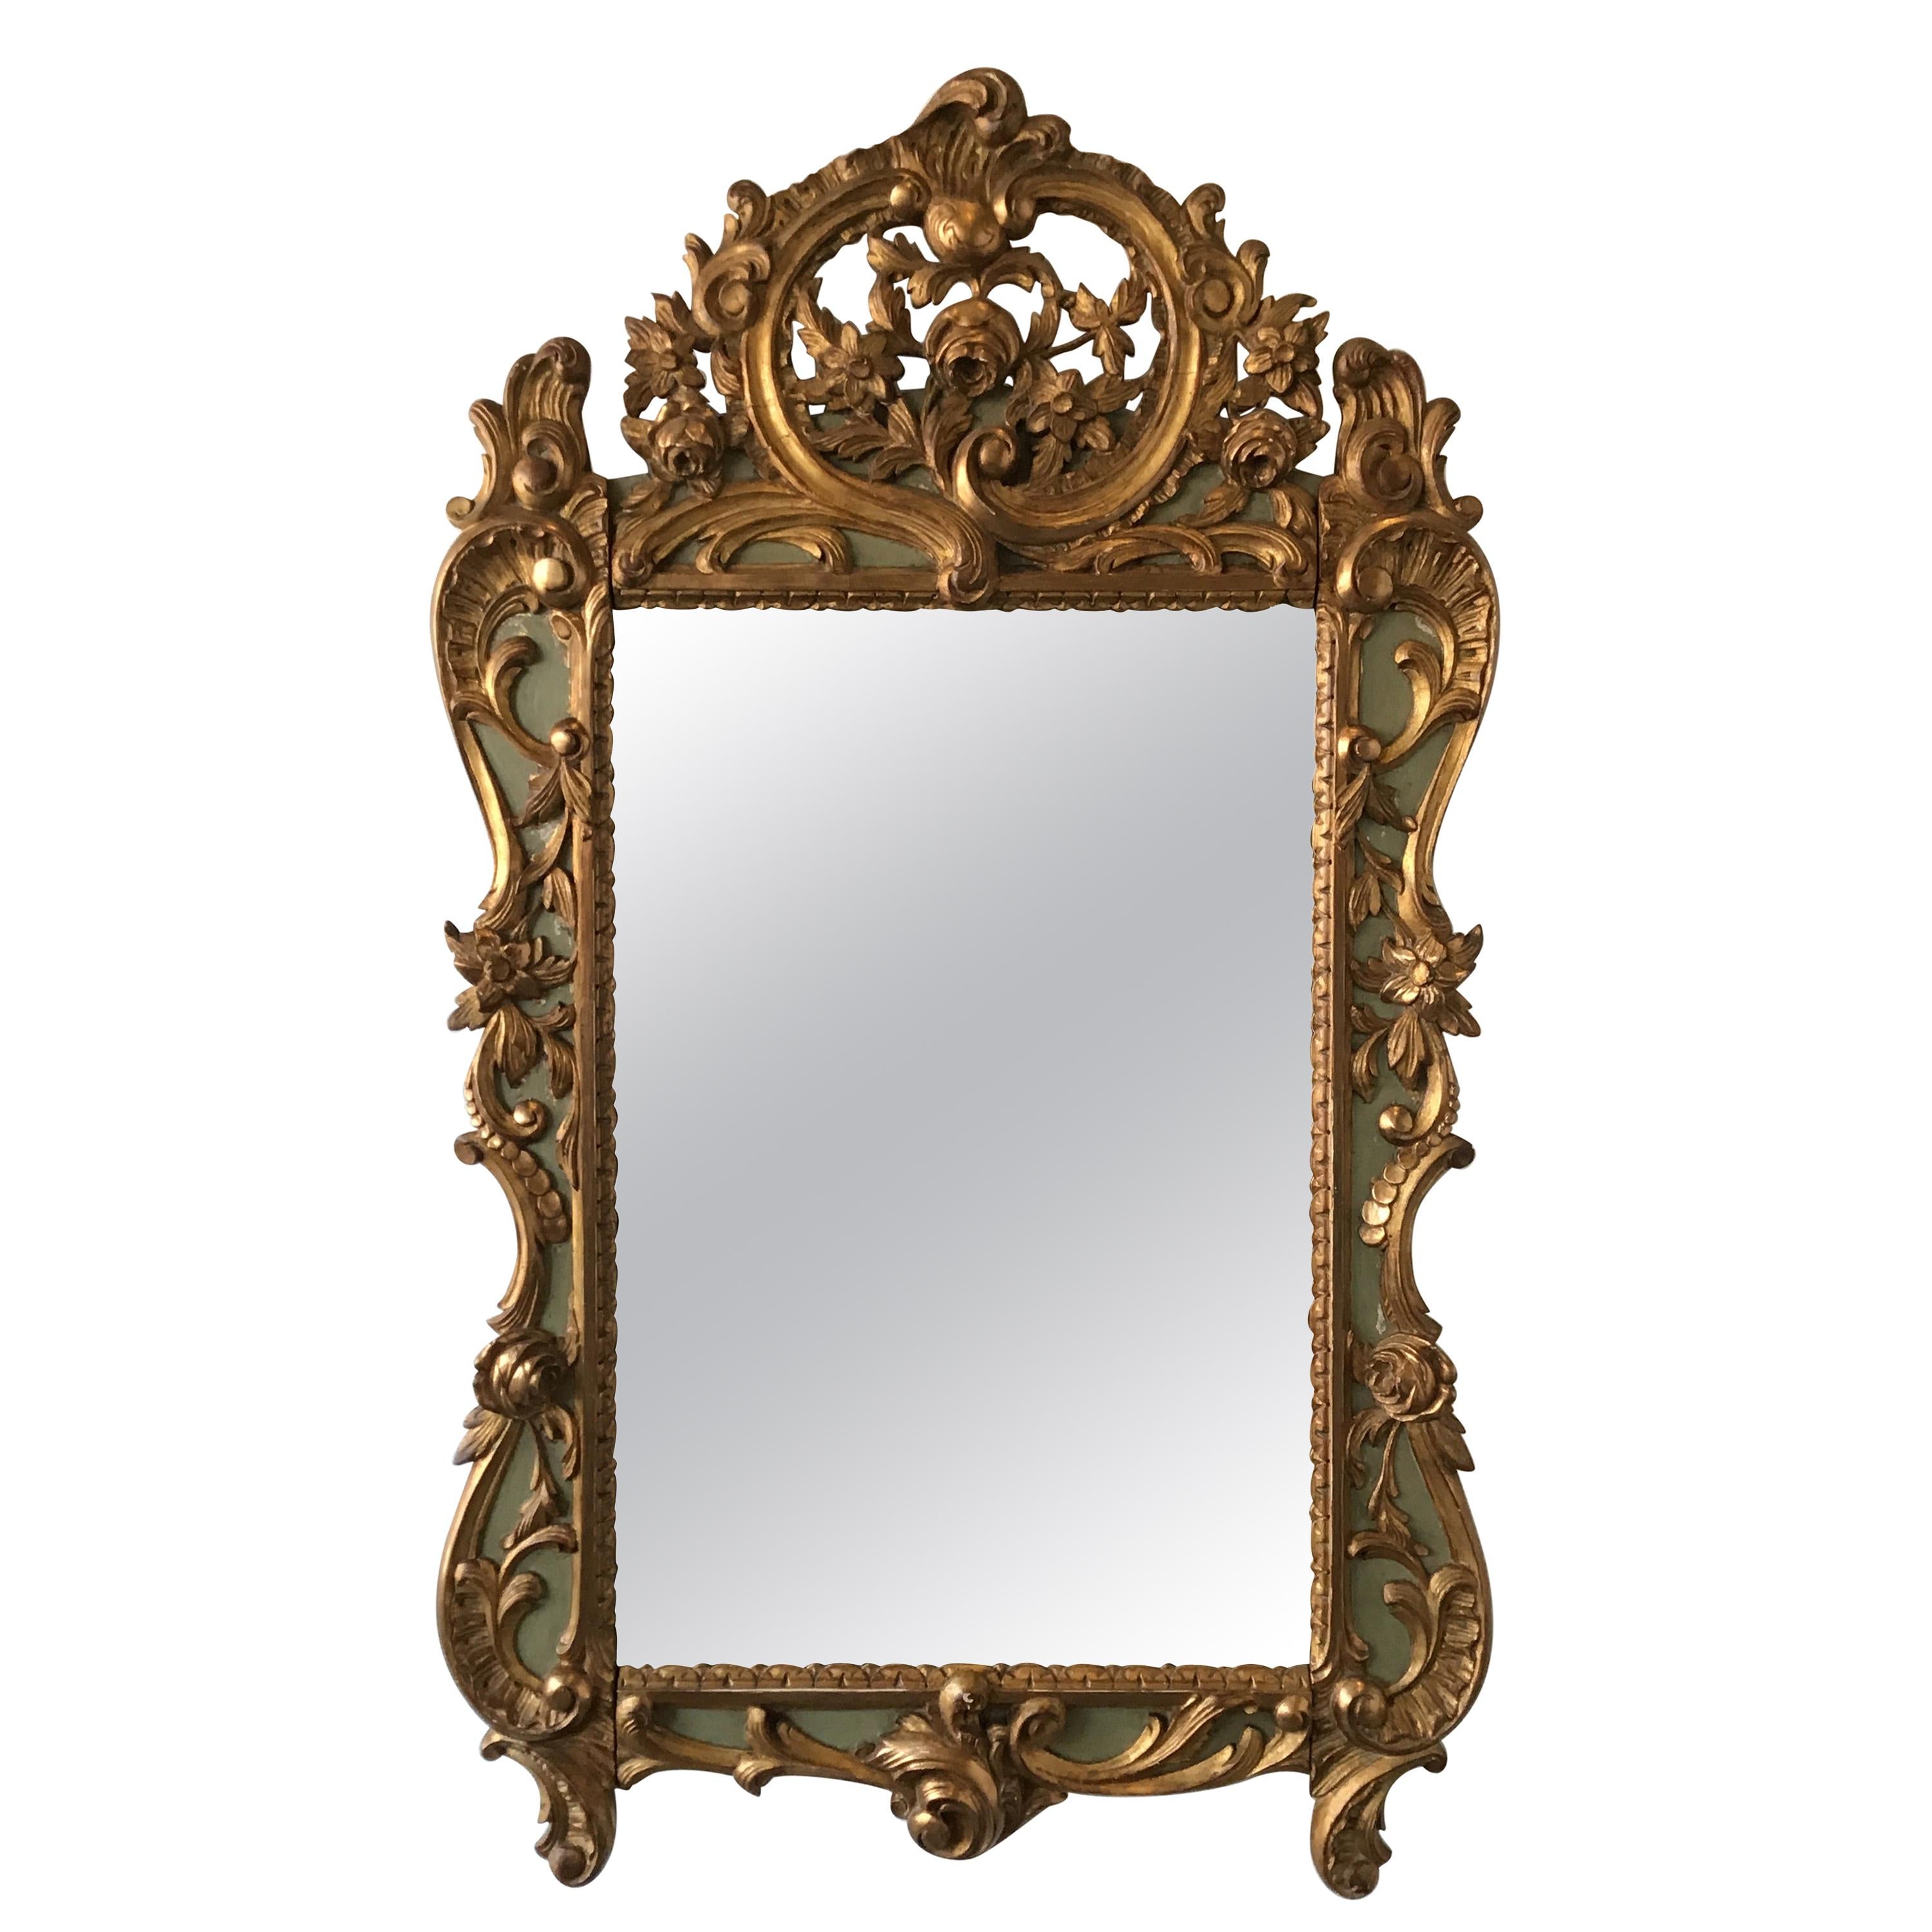 1870s French Carved Wood Gilt Mirror